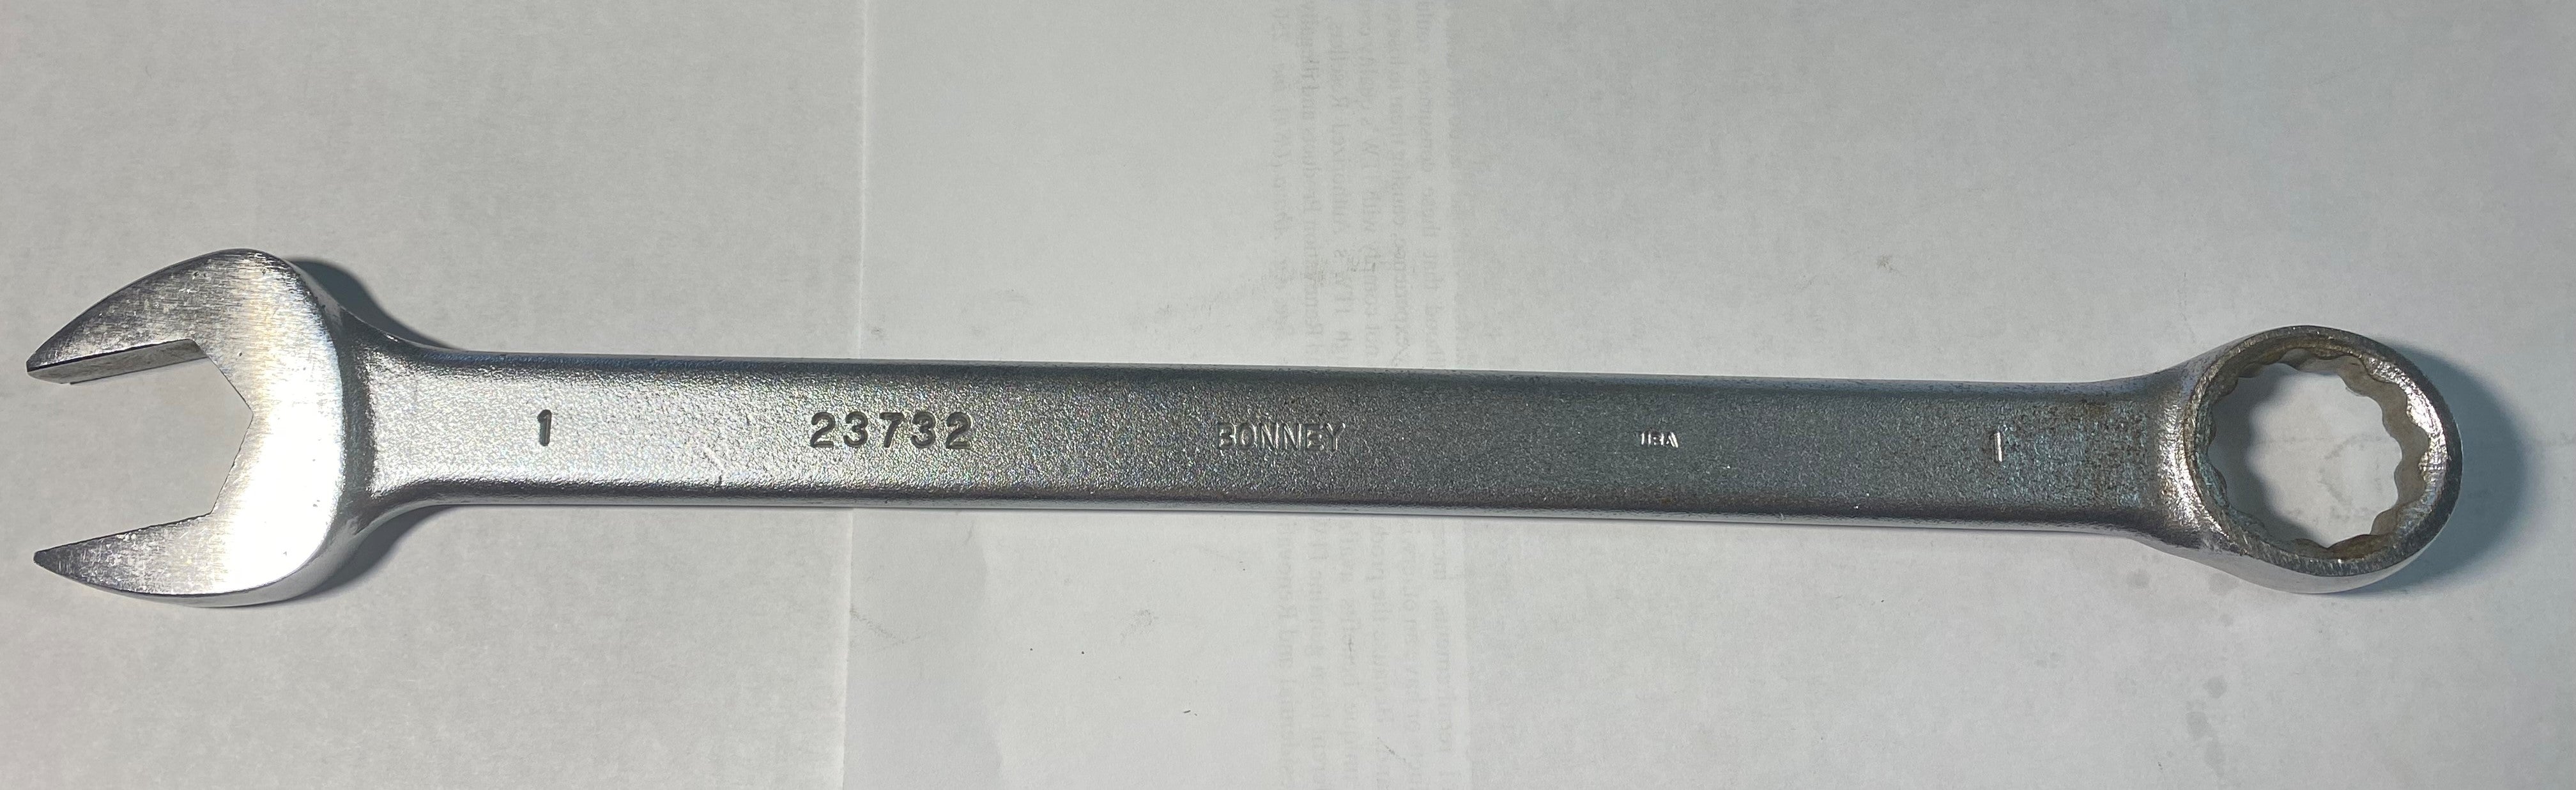 BONNEY 23732 1" Combination Wrench 12pt. USA